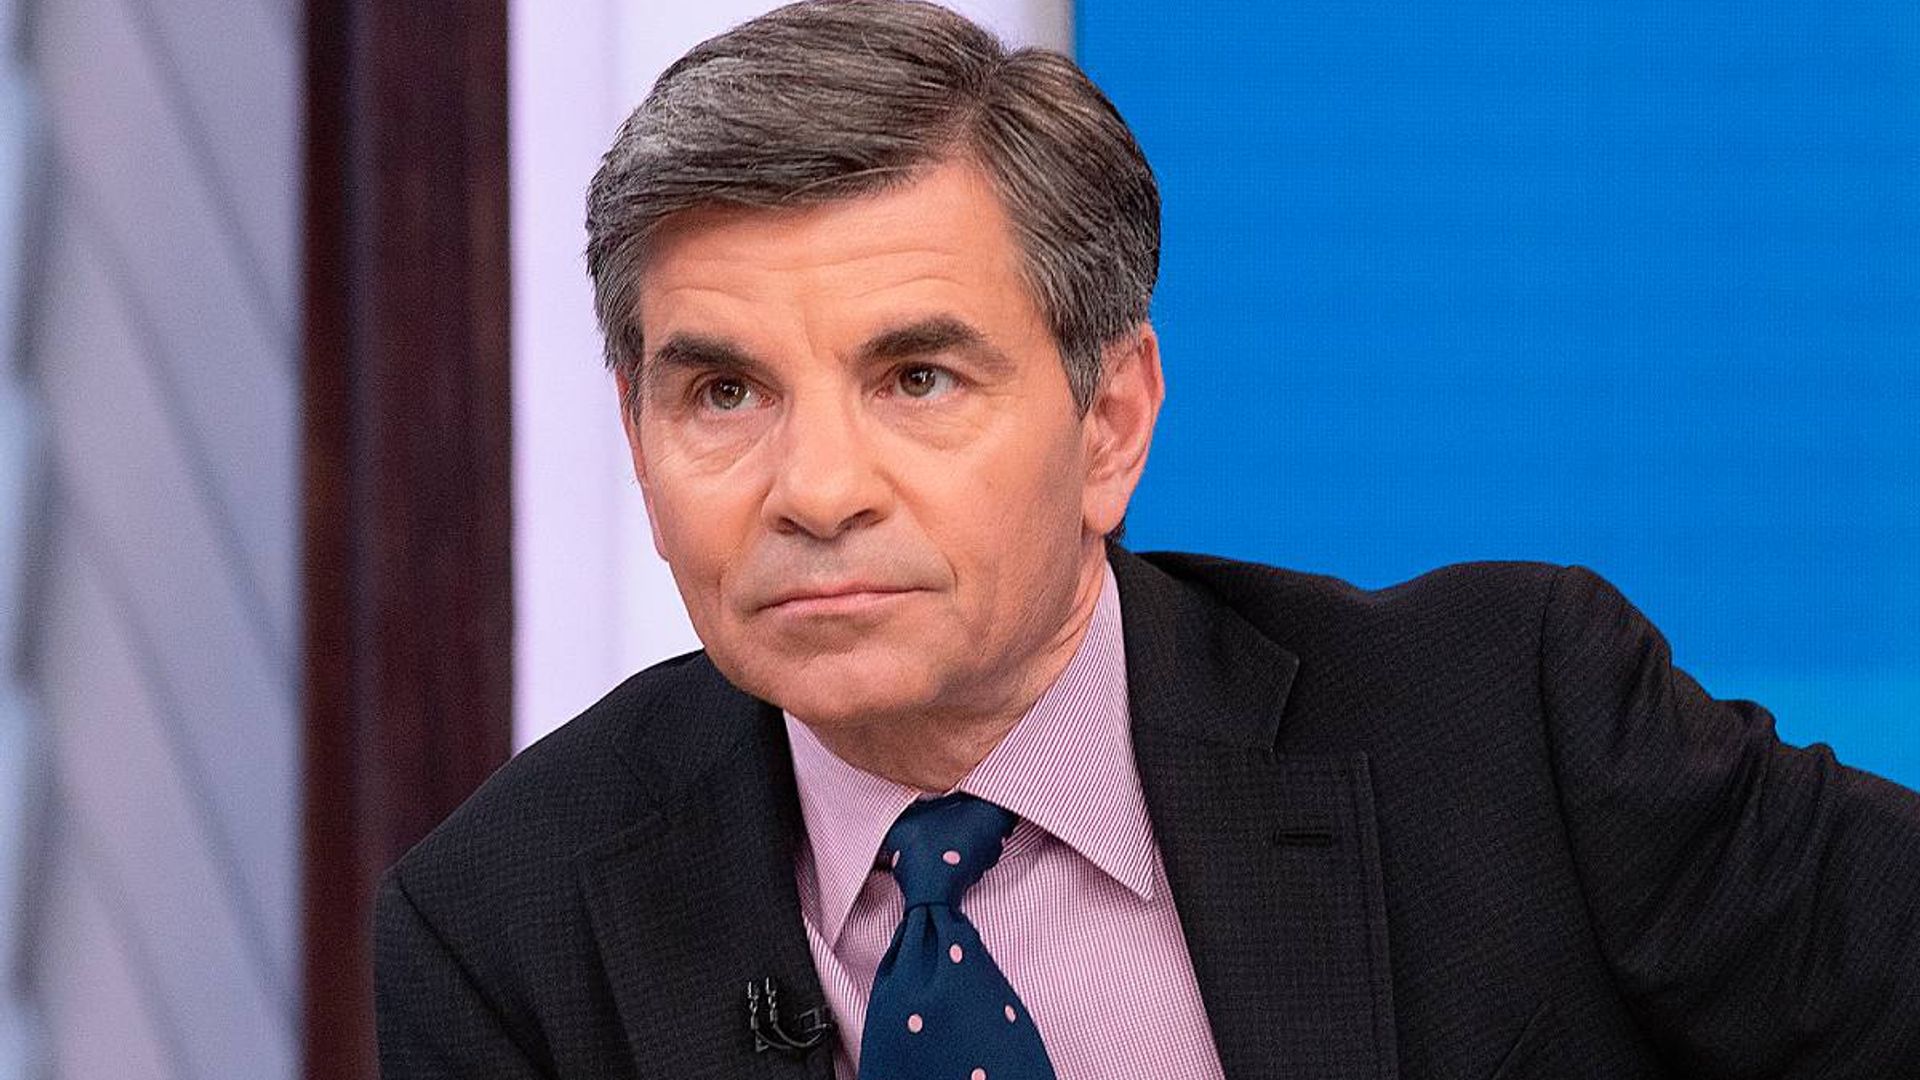 gma-george-stephanopoulos-selfie-sparks-reaction